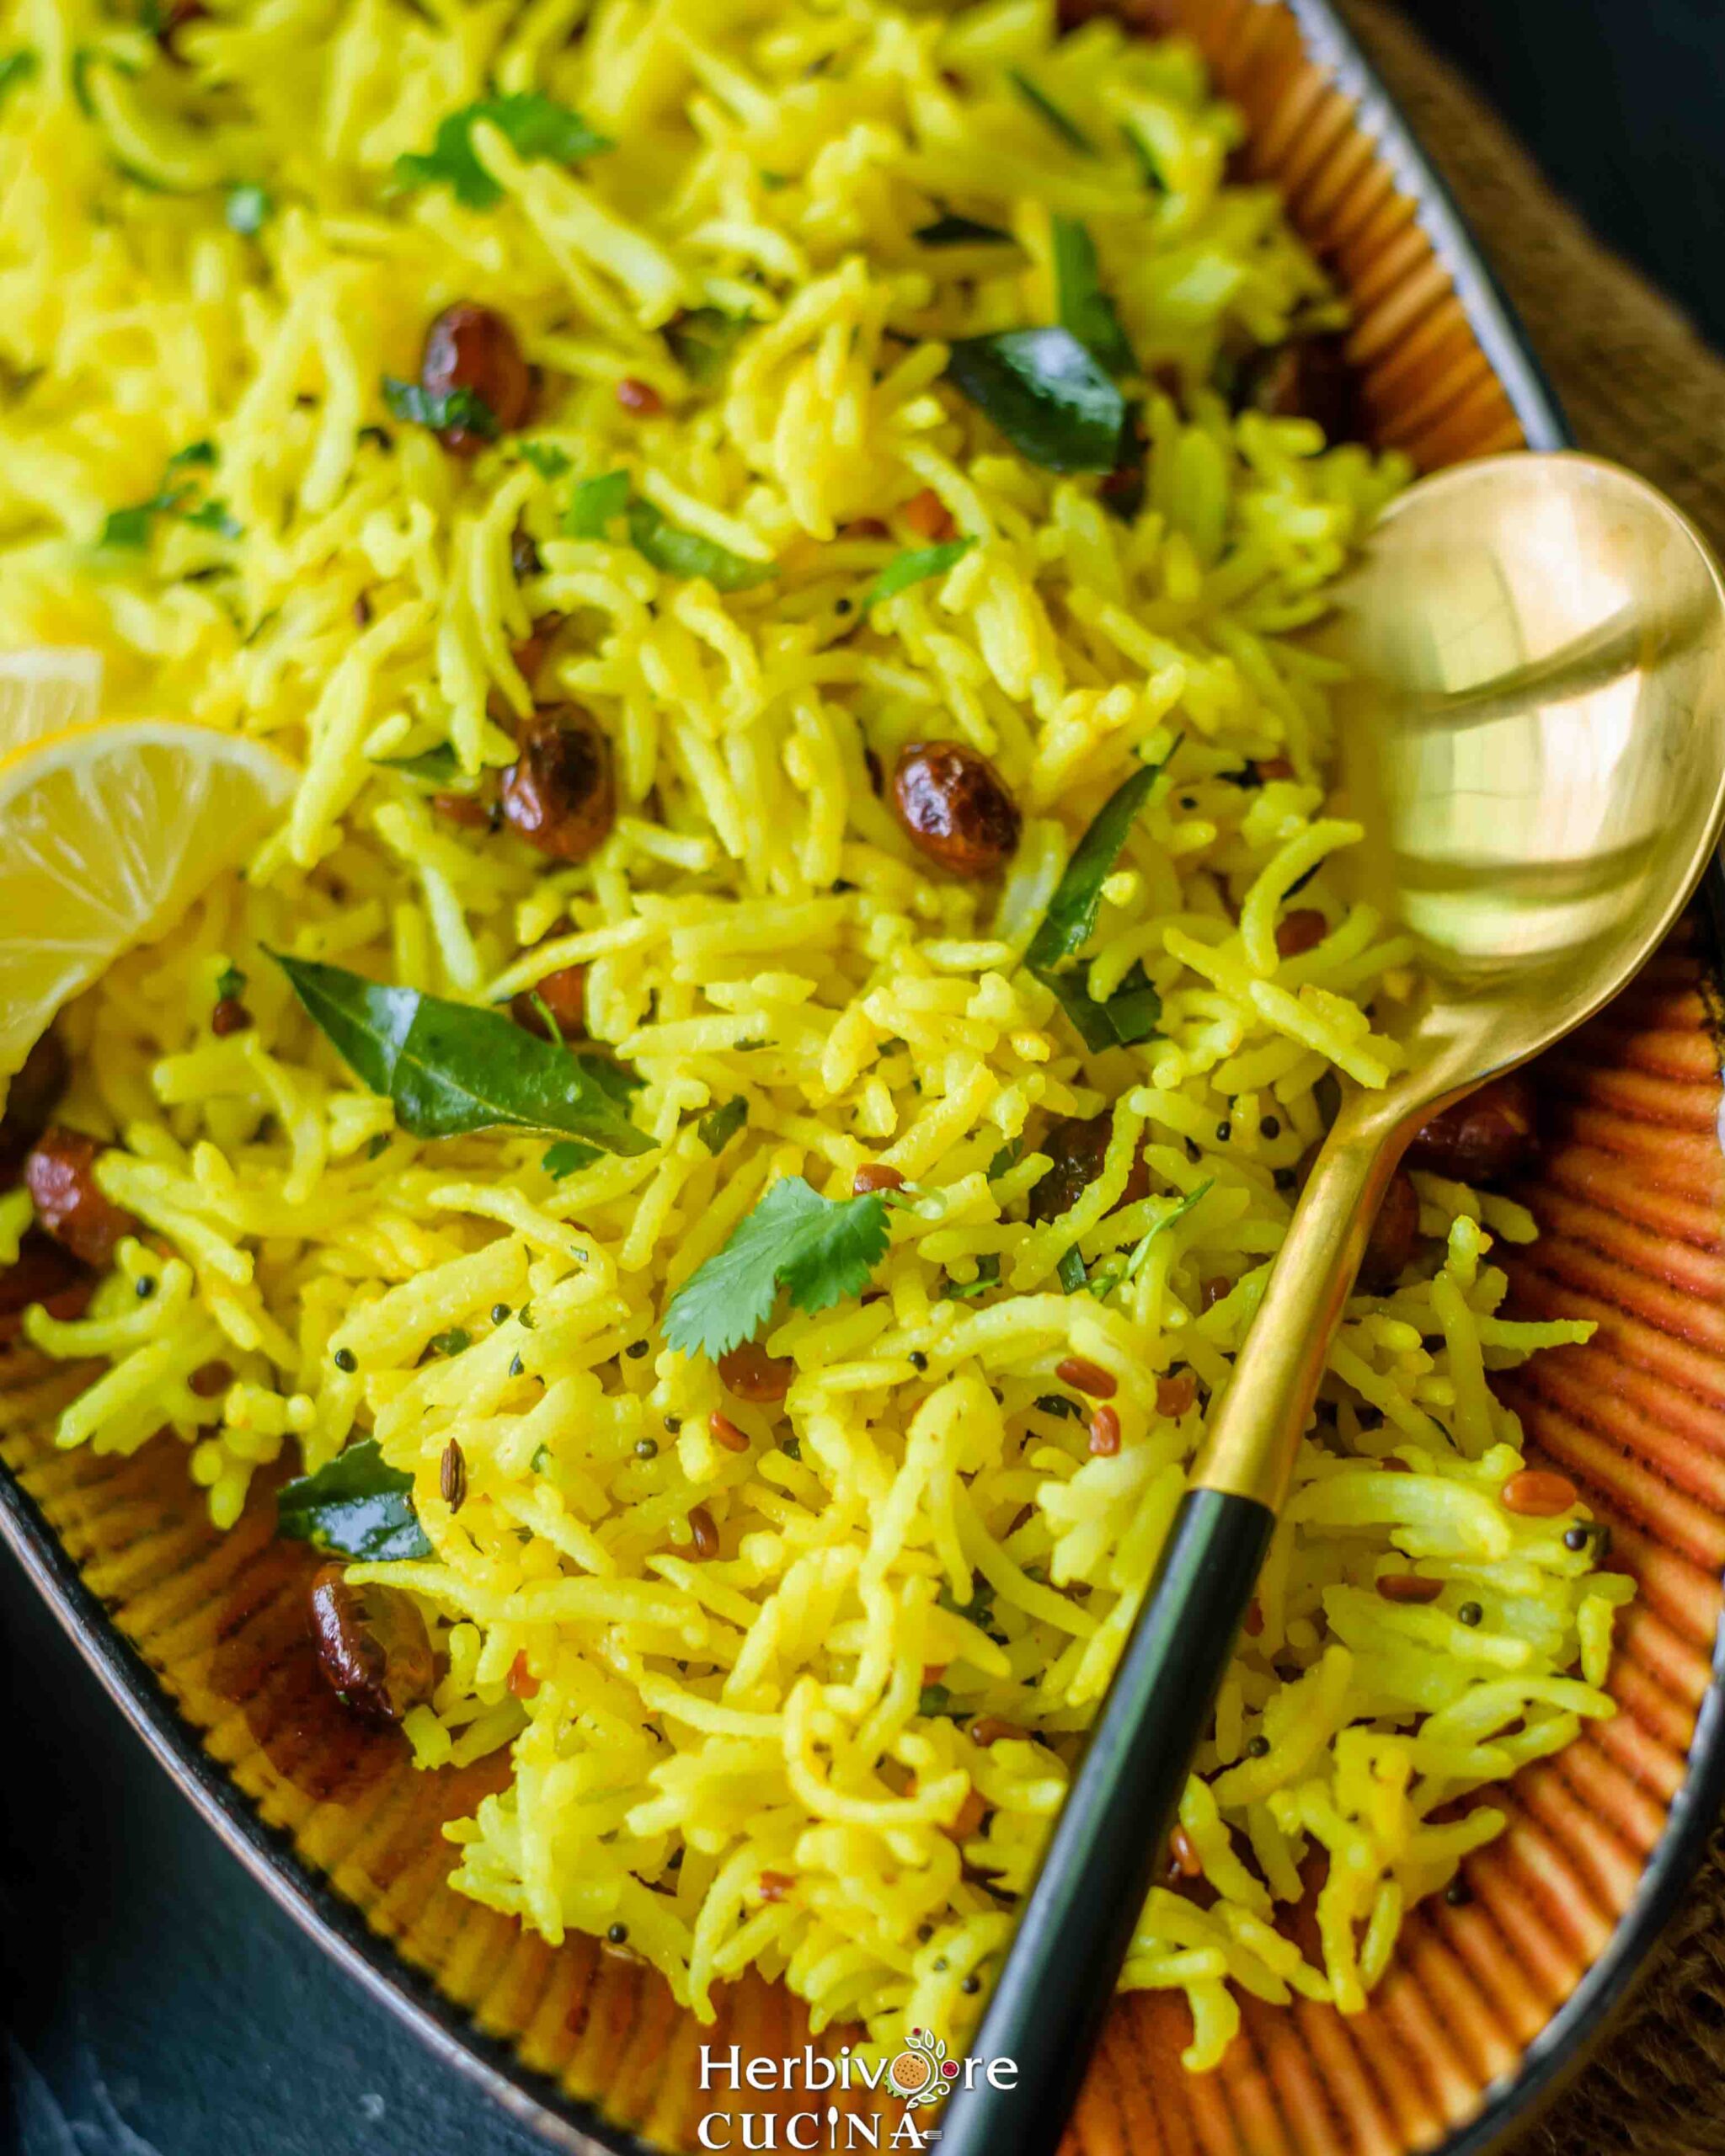 A platter full of lemon rice with peanuts, turmeric and other tempering ingredients.